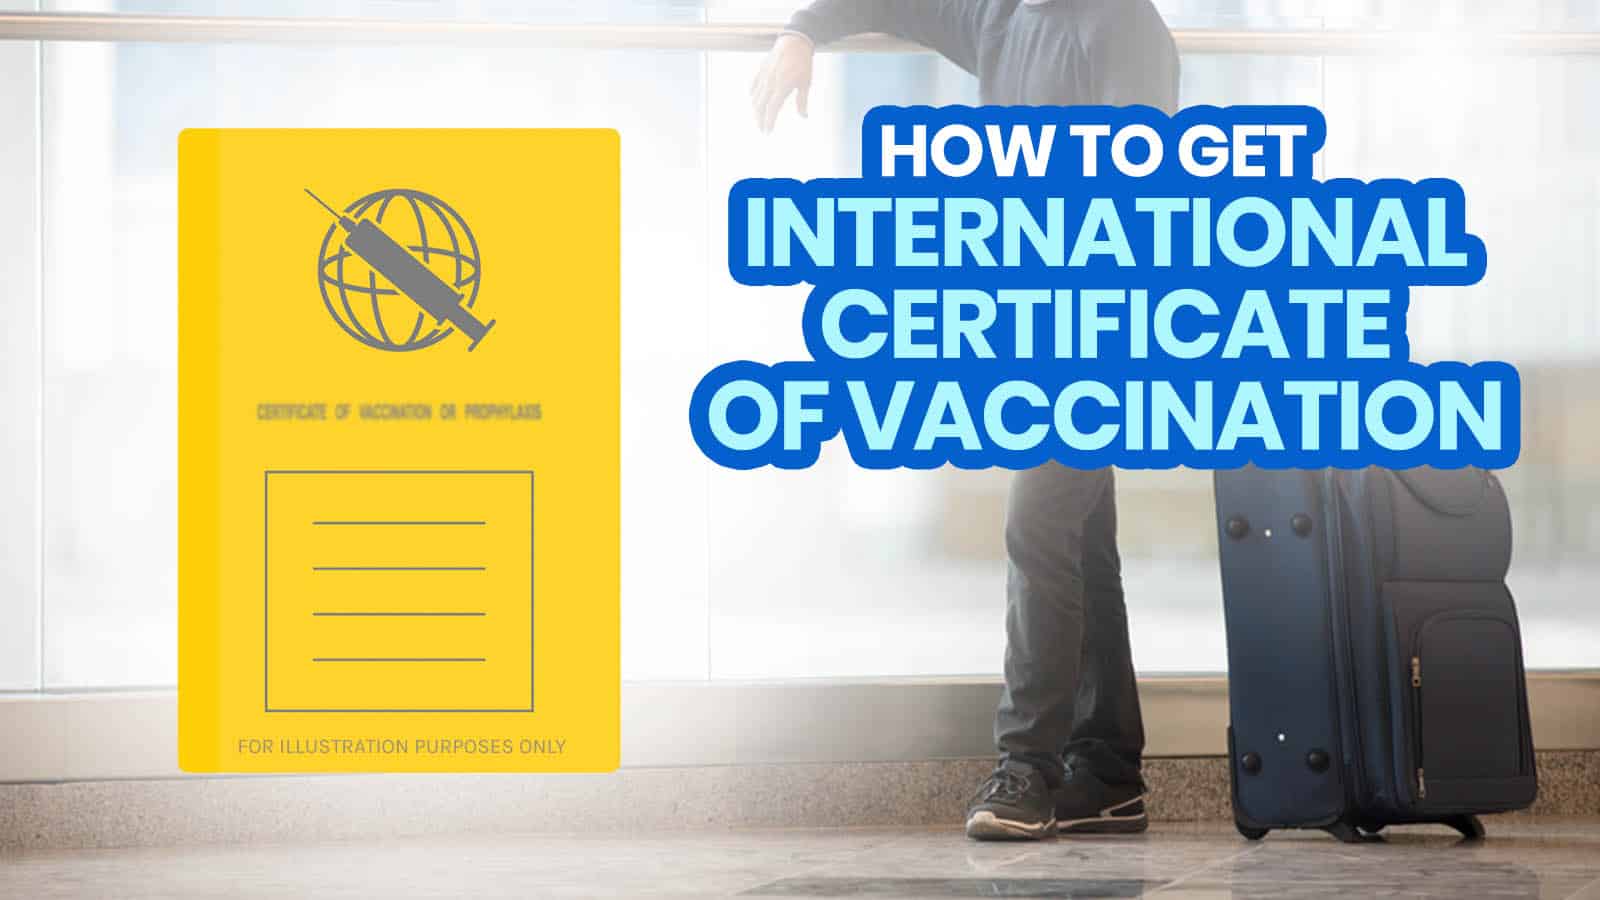 INTERNATIONAL CERTIFICATE OF VACCINATION (ICV) BOQ Requirements + How to Expedite